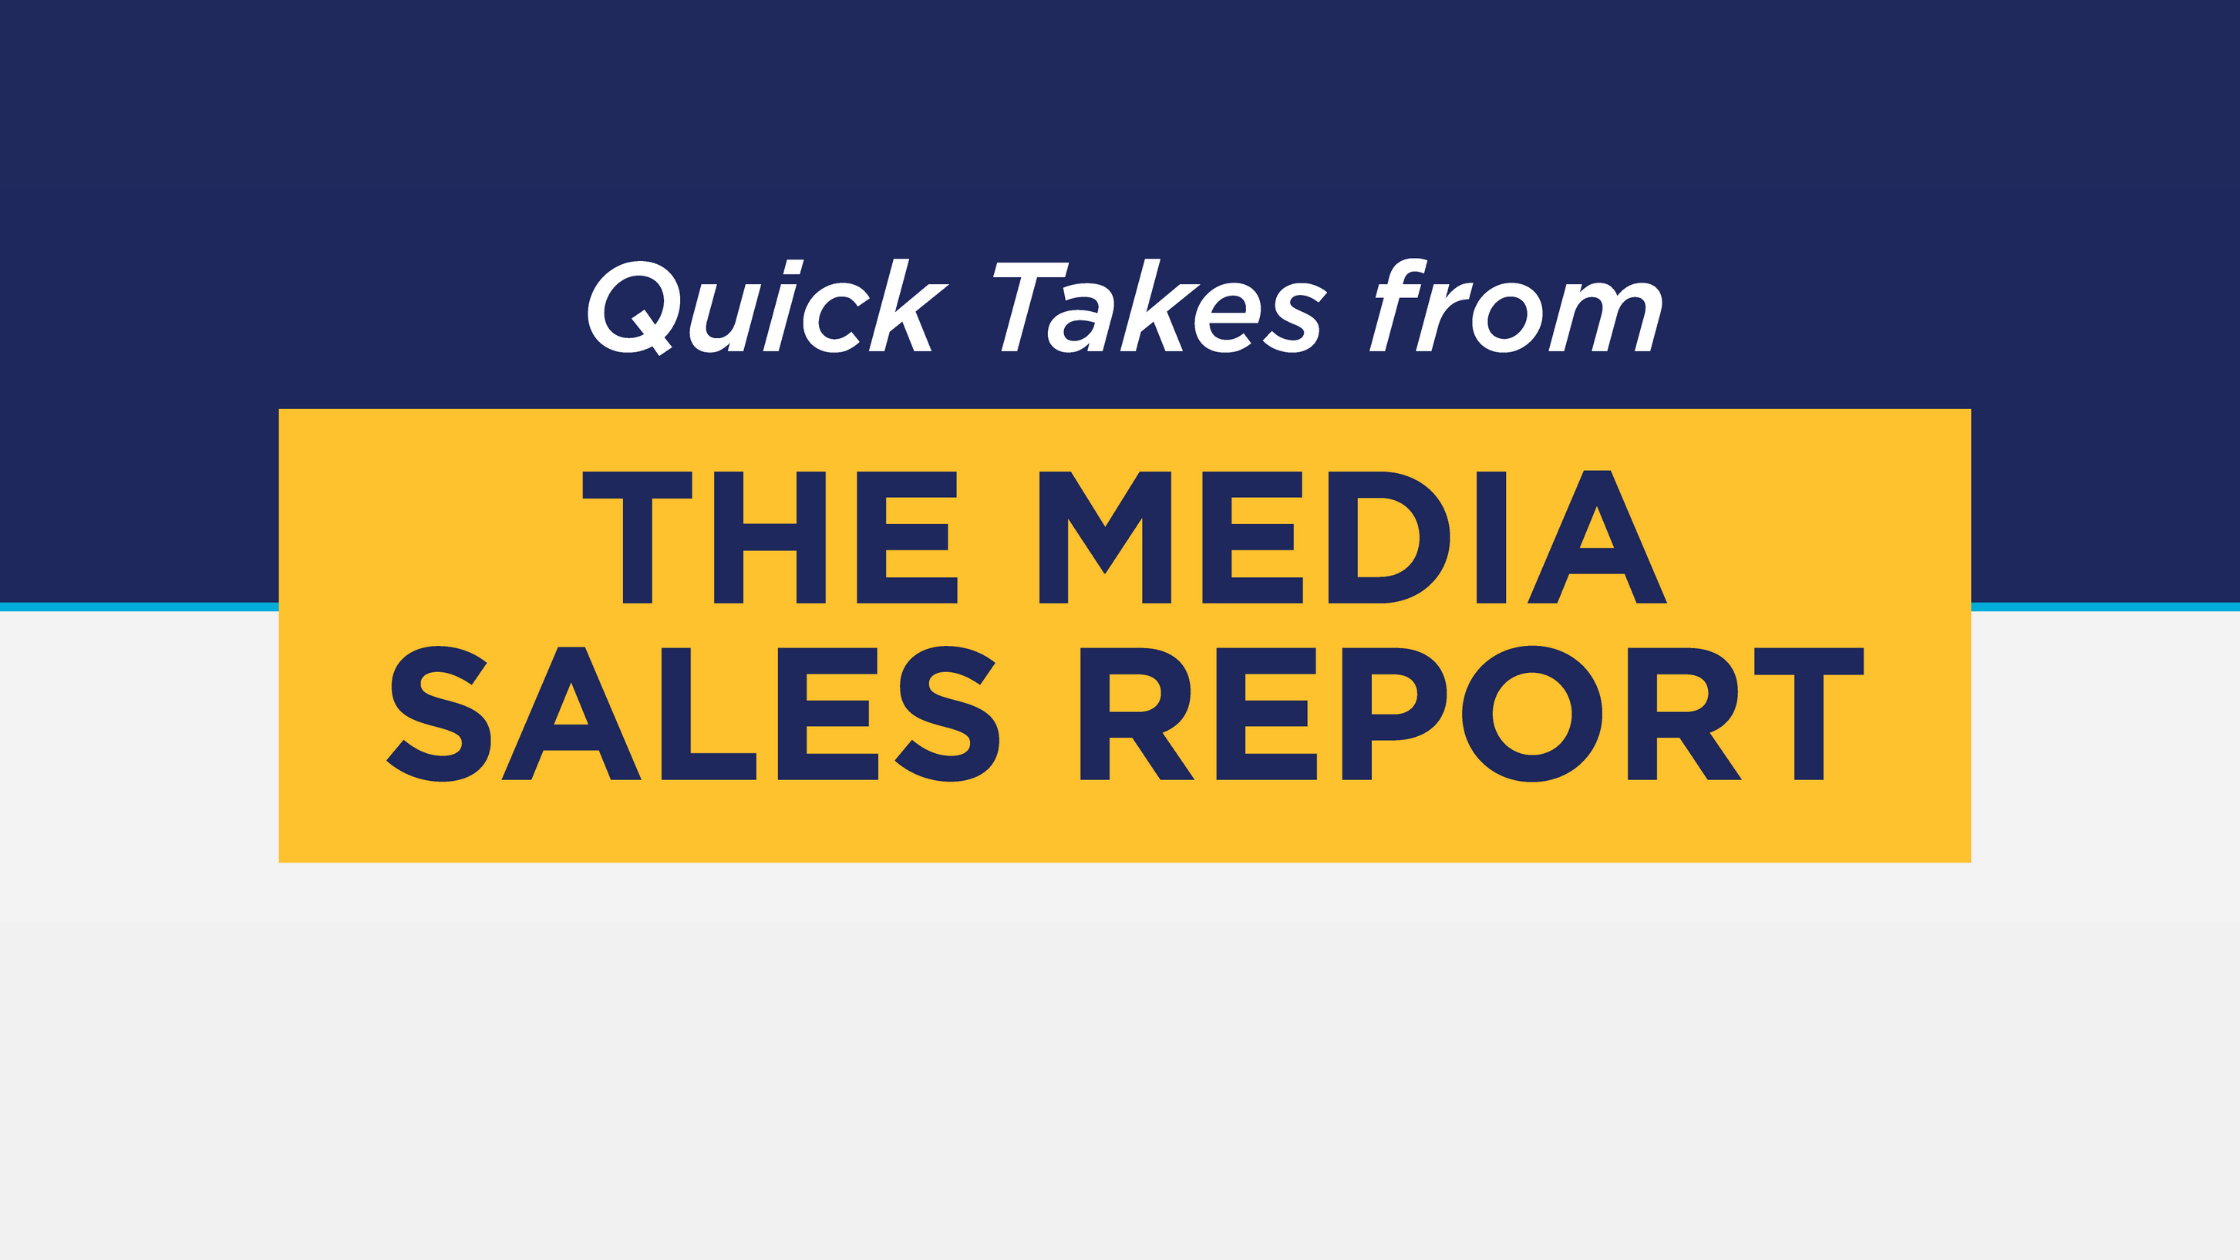 [INFOGRAPHIC] Quick Takes From The Media Sales Report